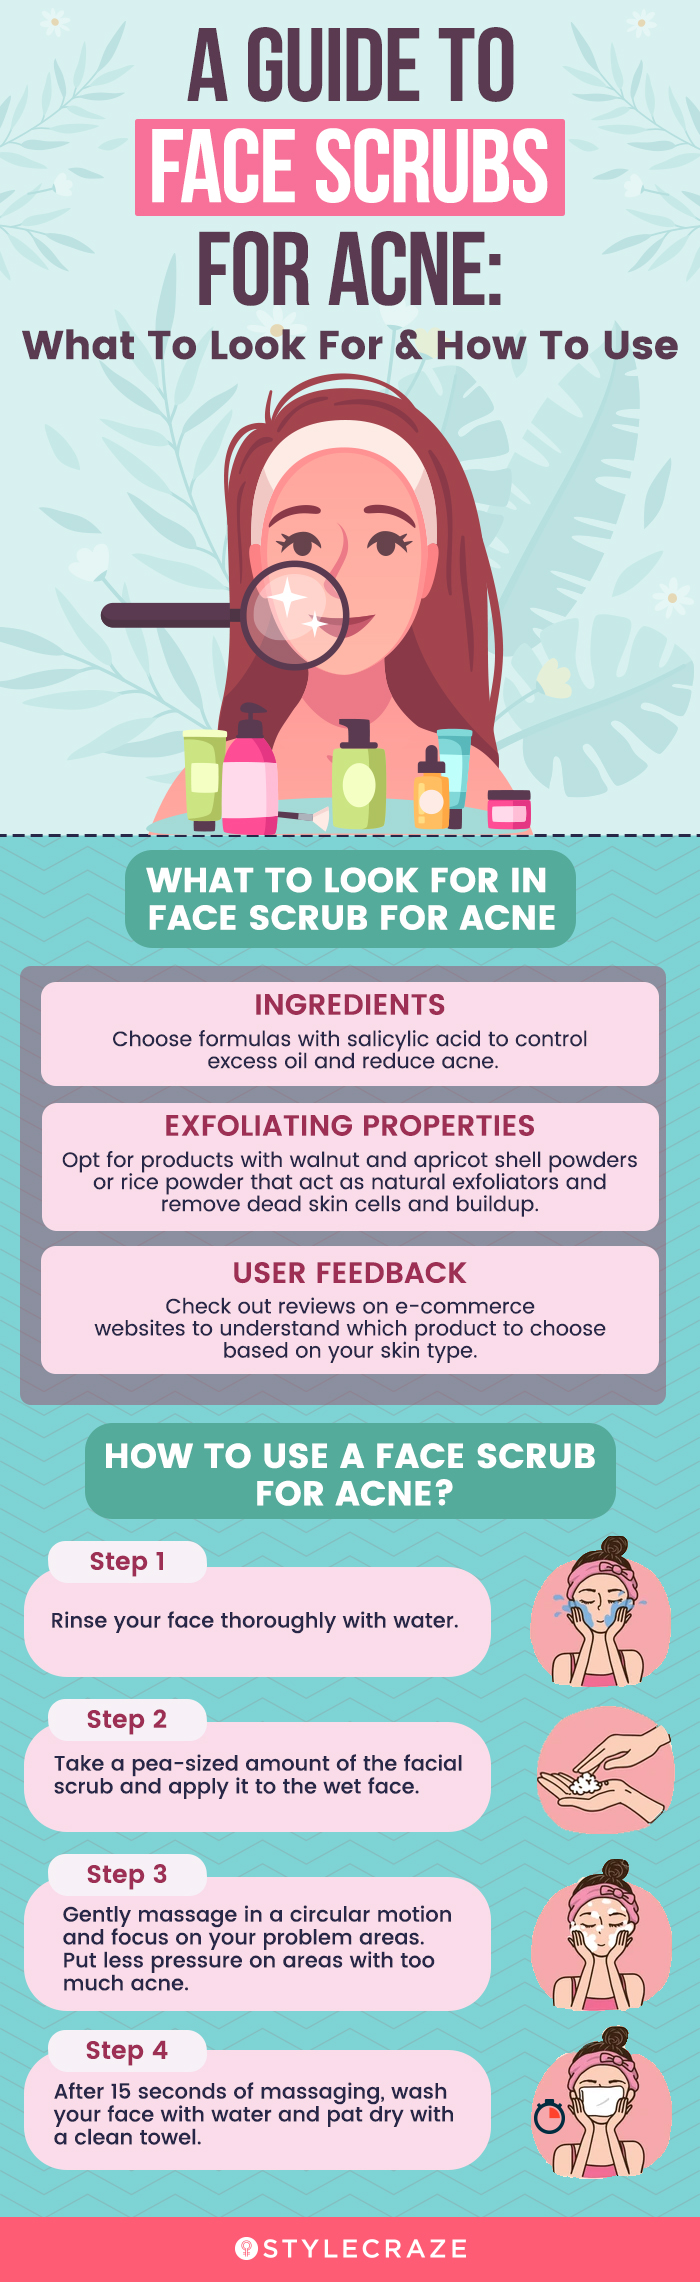 A Guide To Face Scrubs For Acne [infographic]